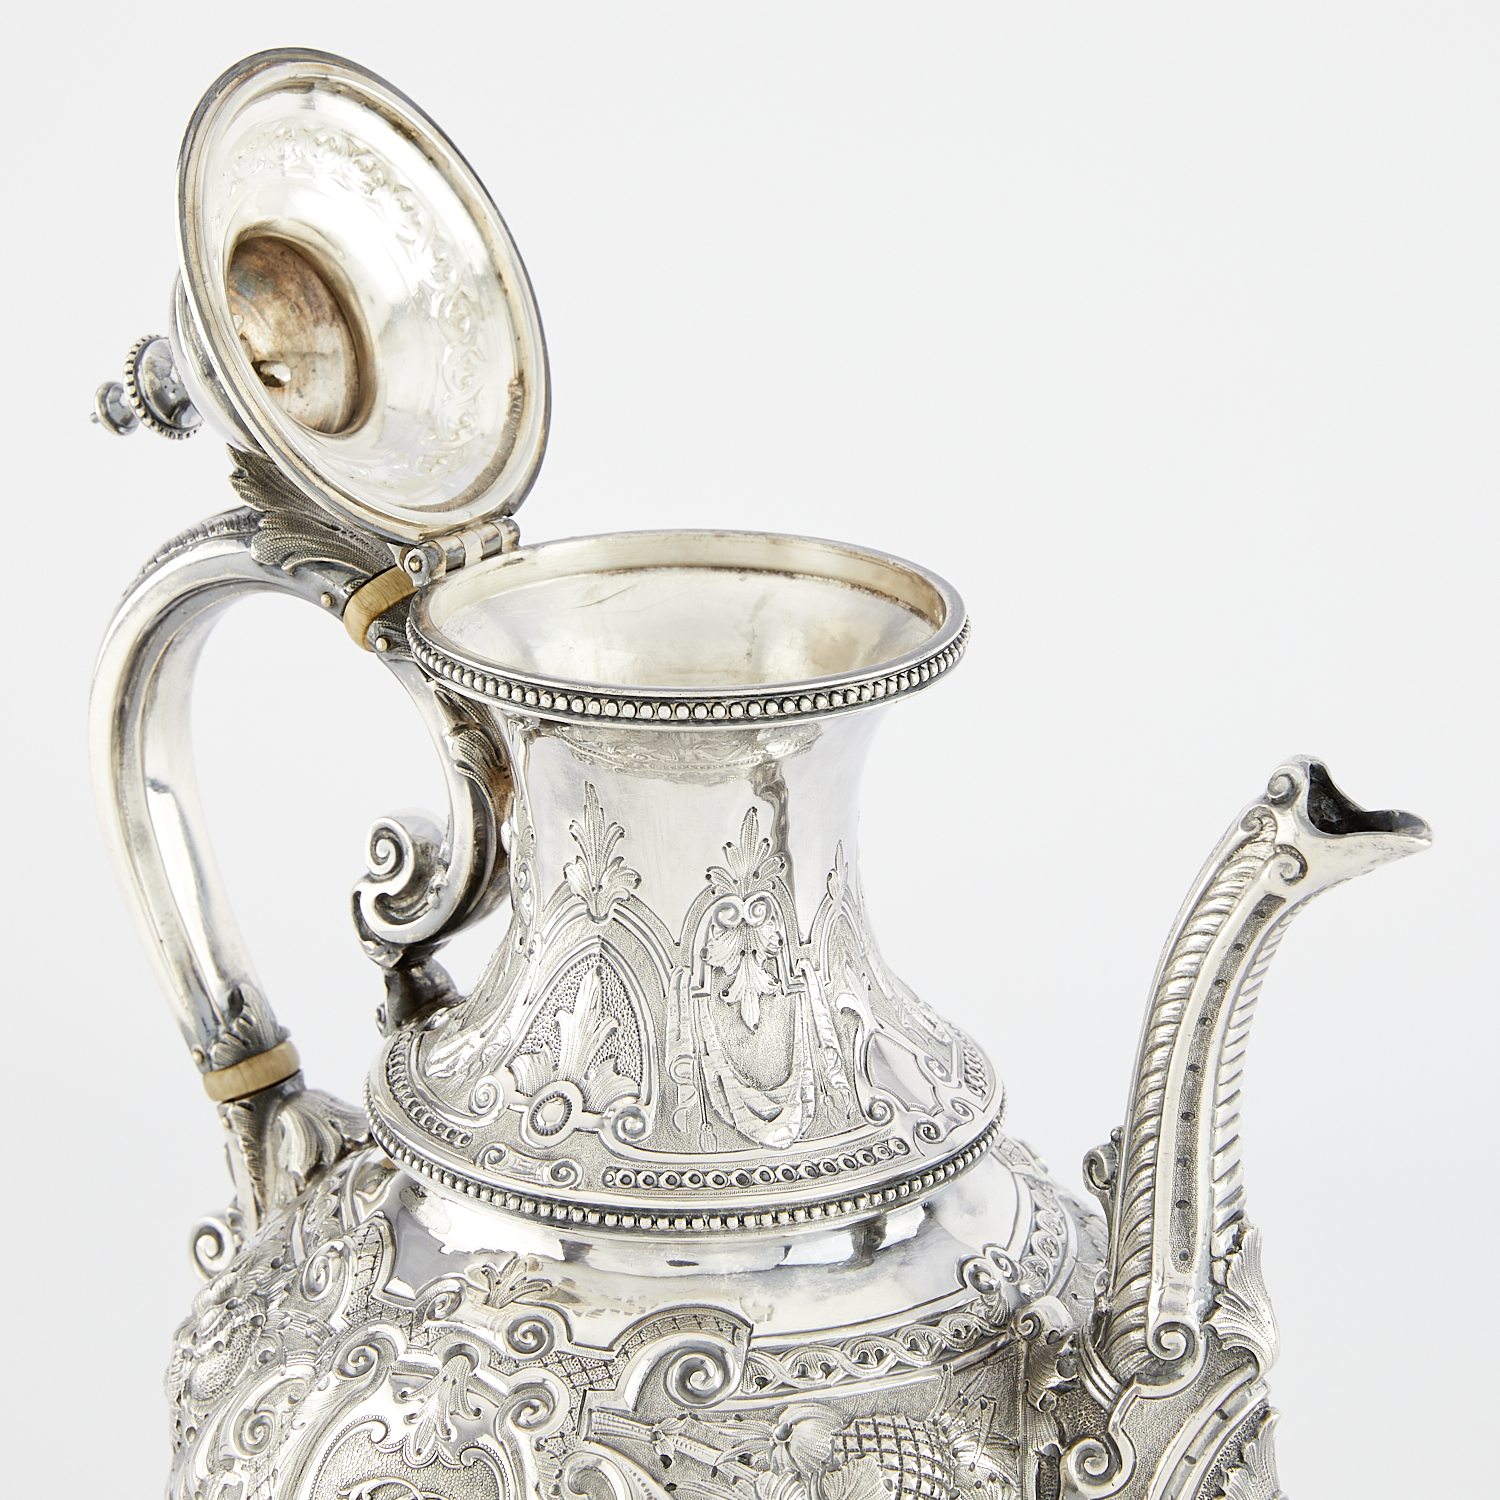 1861 Sheffield Sterling Silver Teapot 38.81 ozt - Image 9 of 12